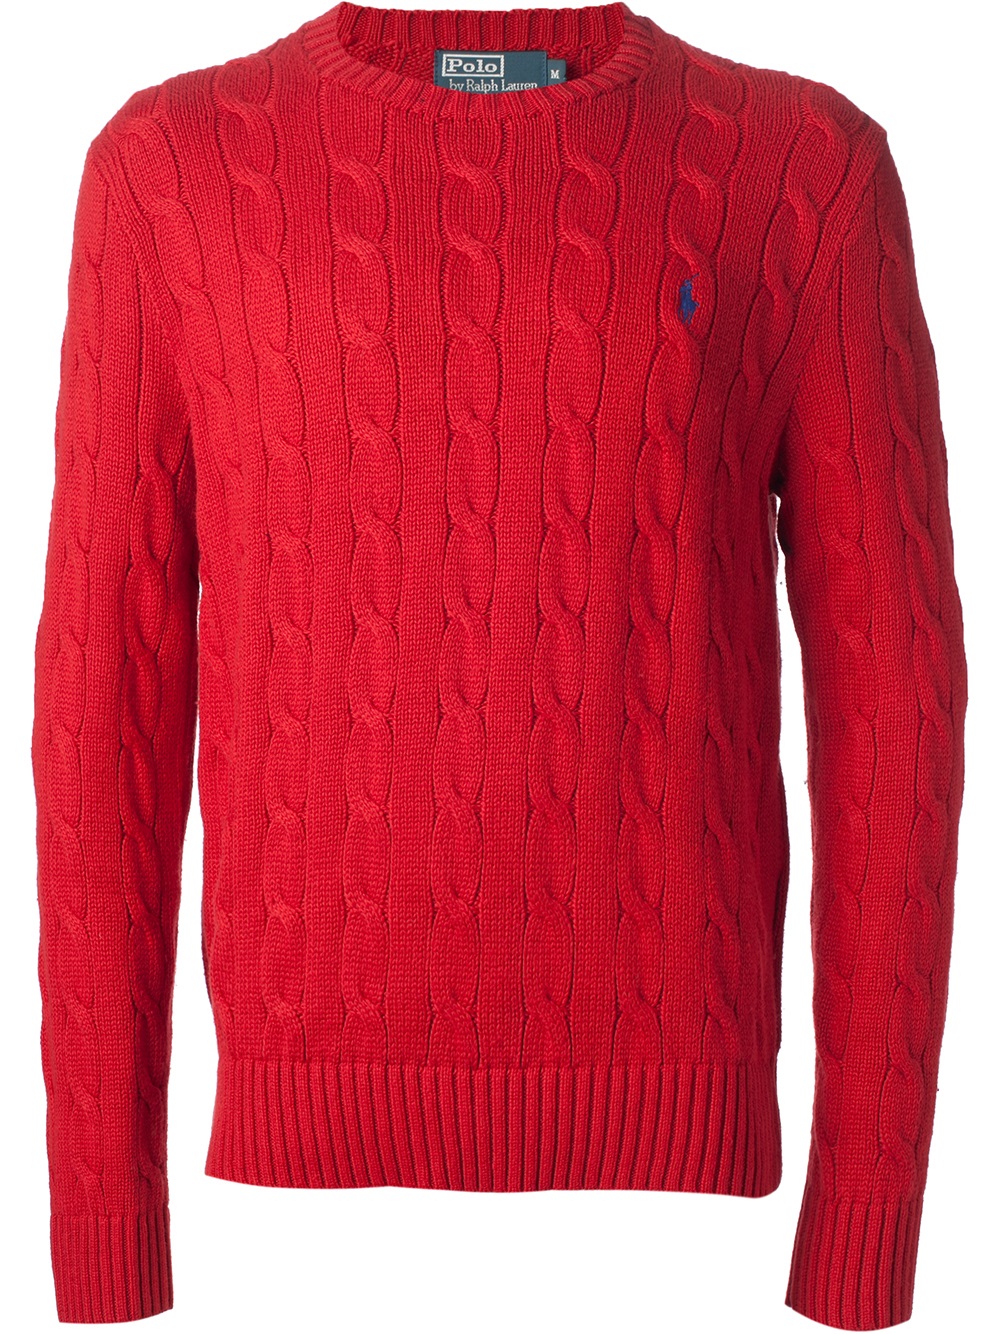 Polo Ralph Lauren Cable Knit Sweater in Red for Men - Lyst